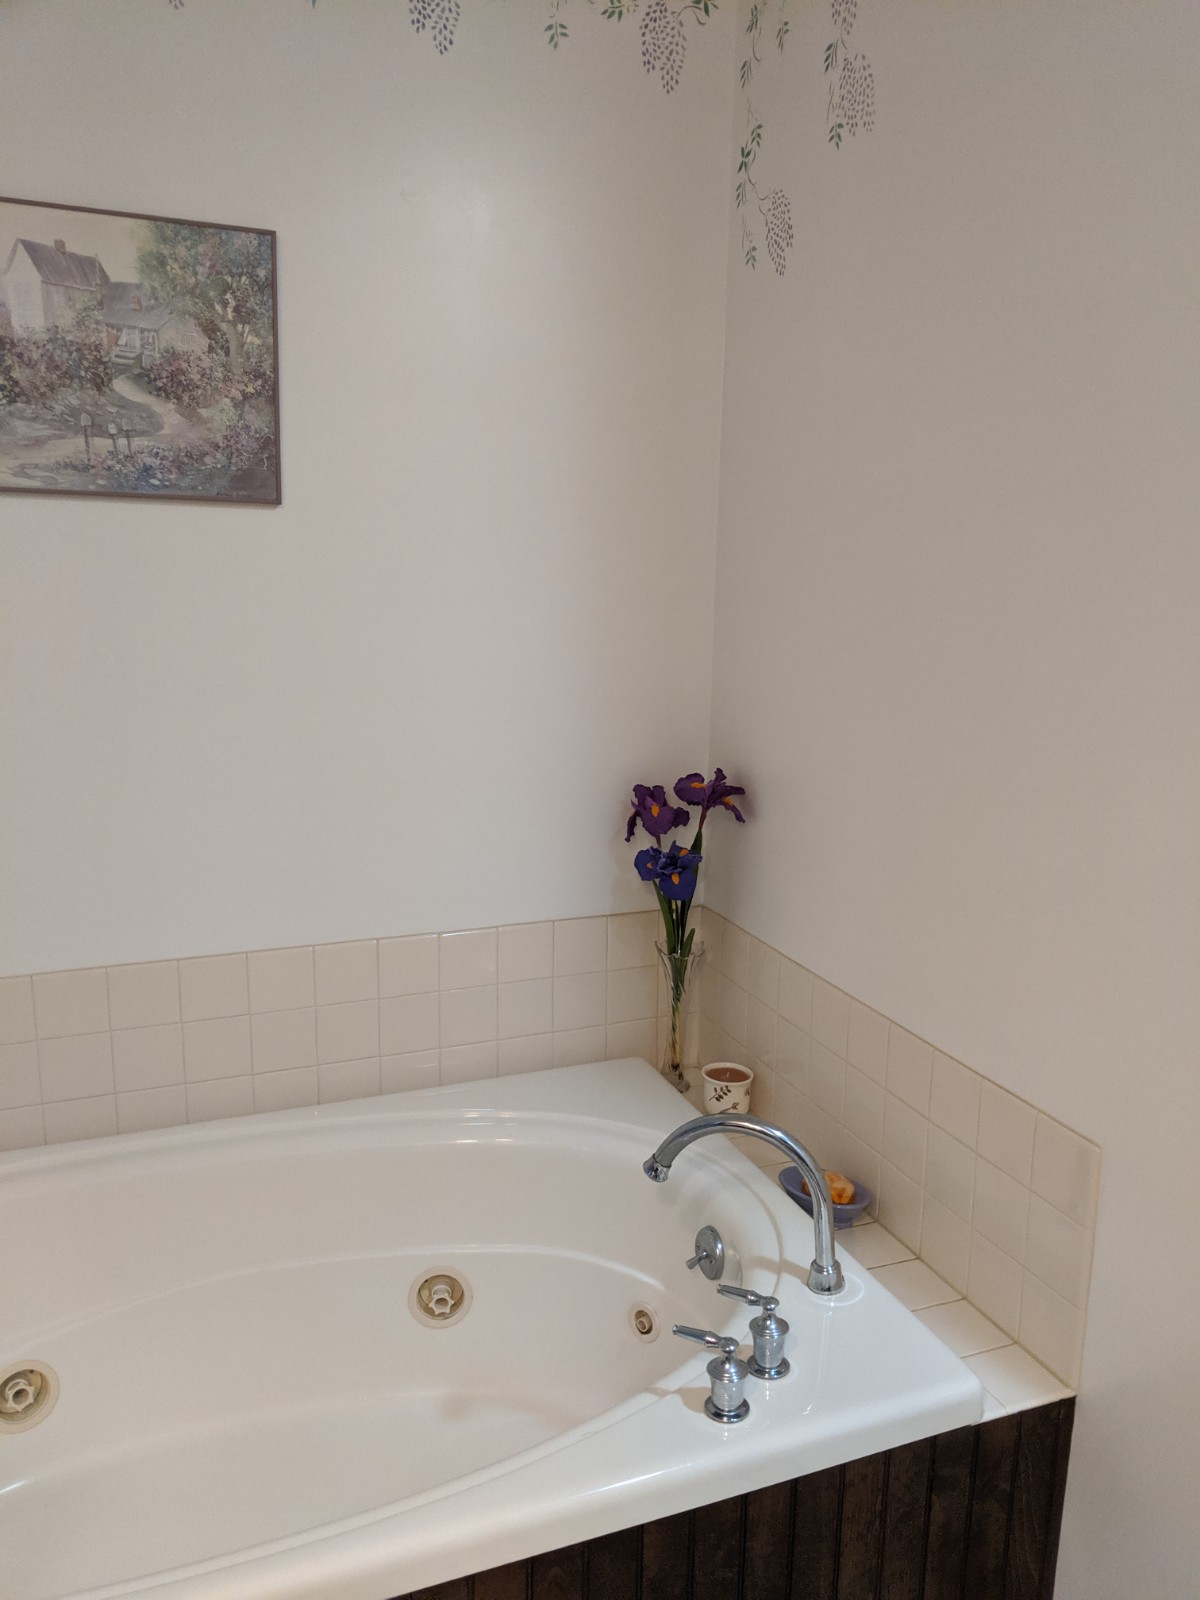 Tub area before the renovation, plan walls, tile and an outdated whirlpool tub